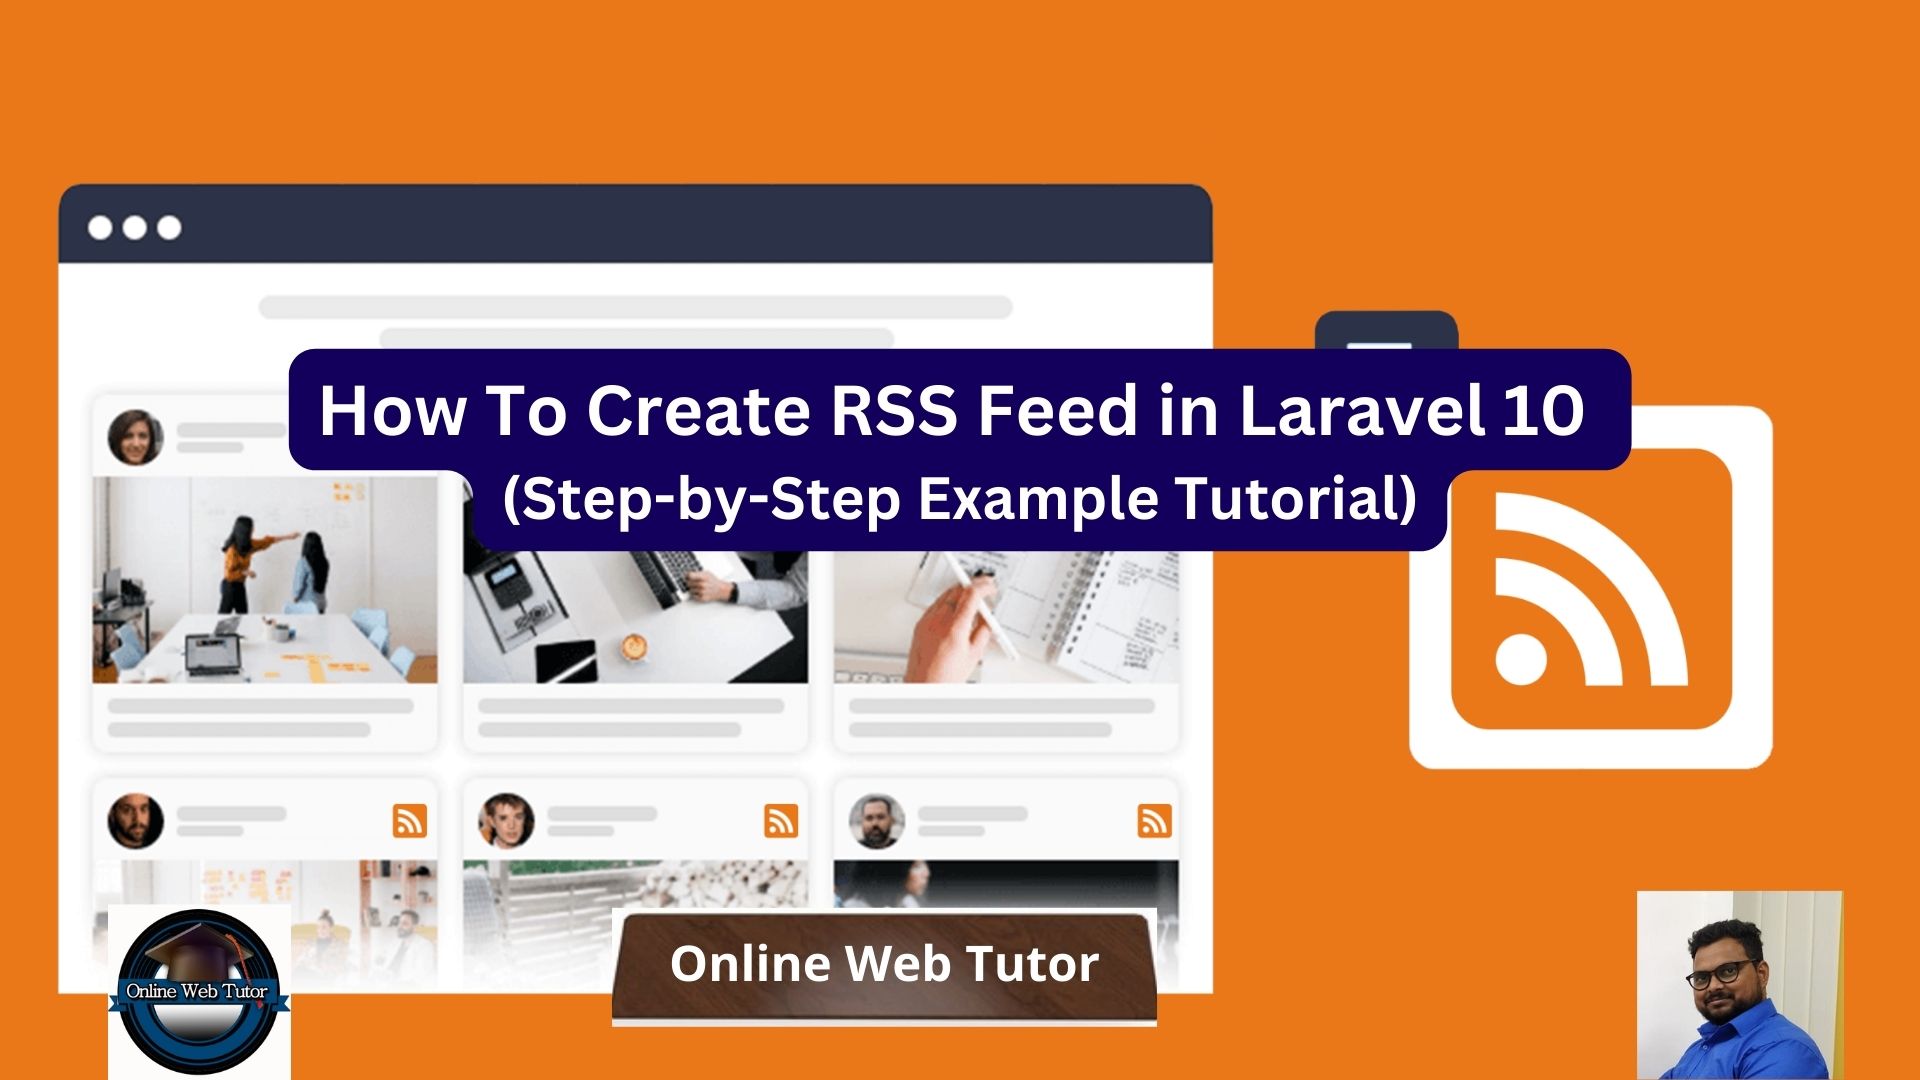 How To Create RSS Feed in Laravel 10 Example Tutorial